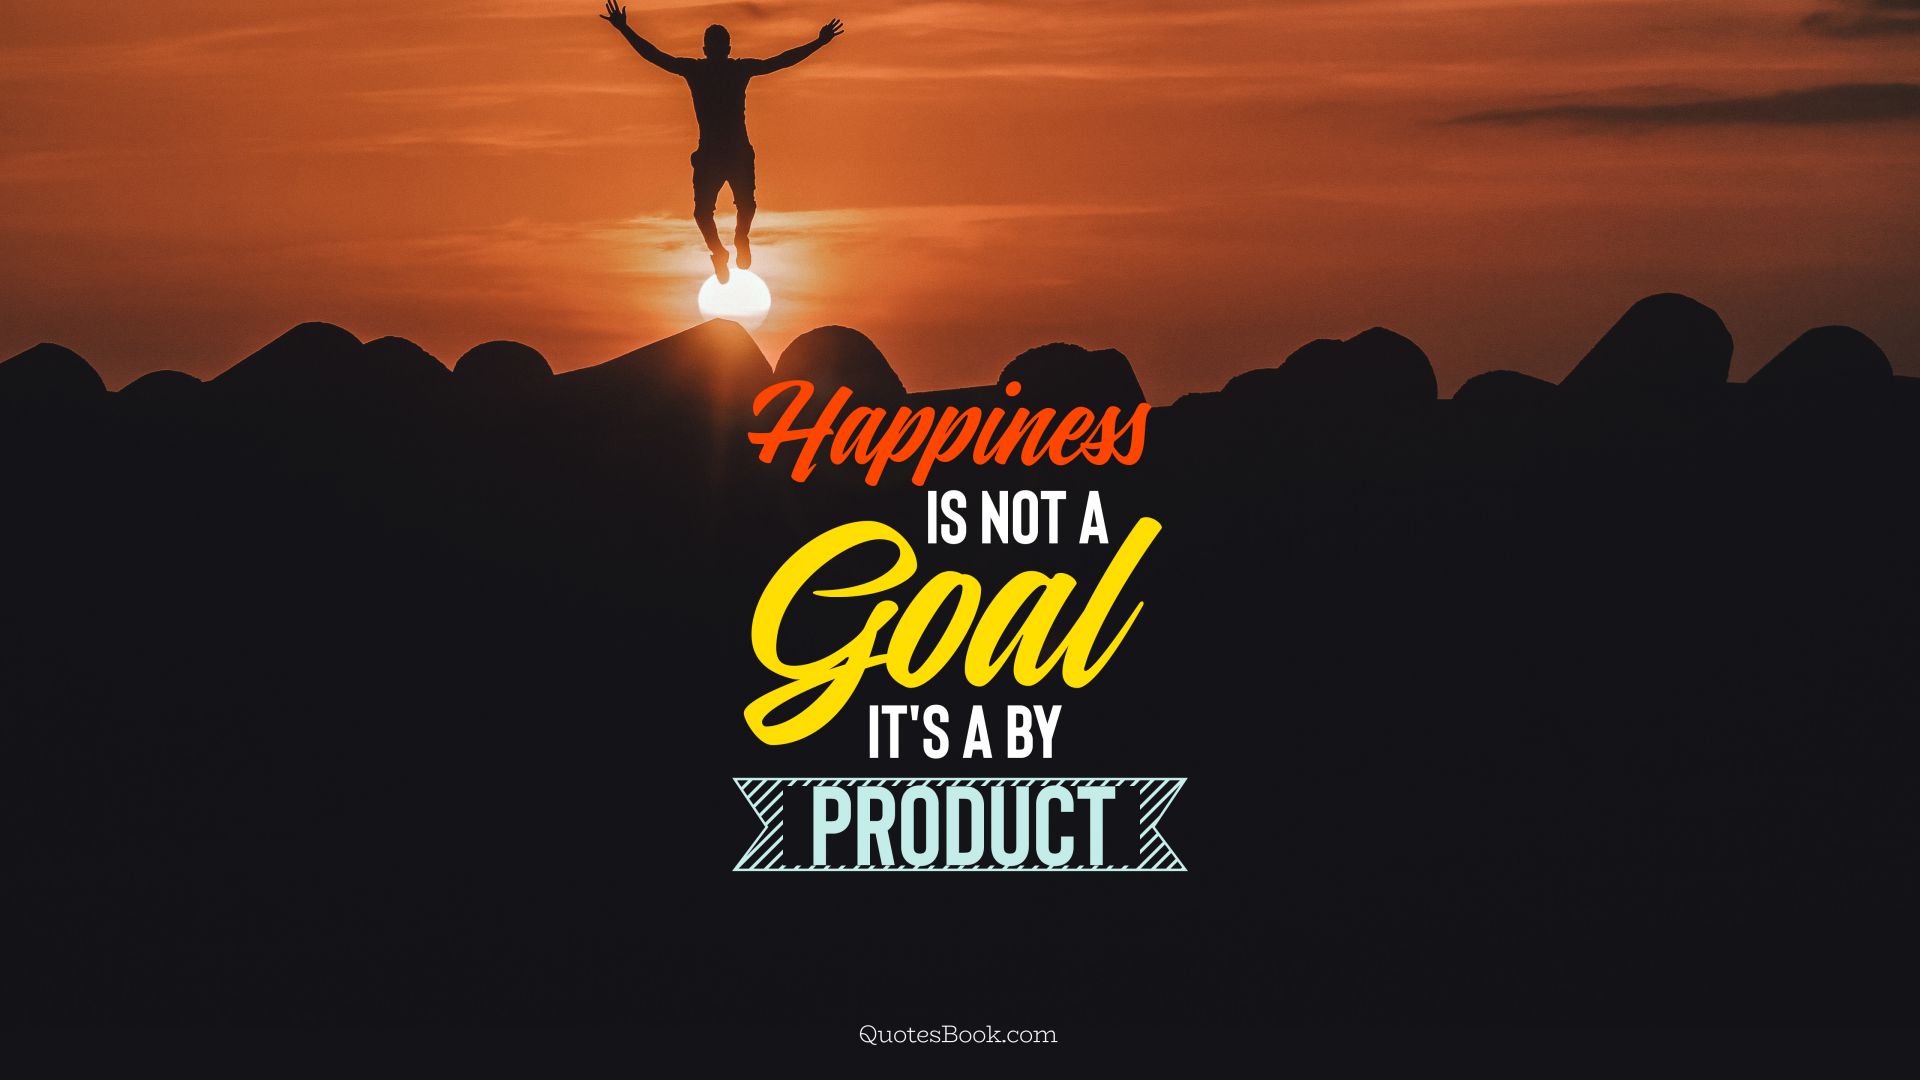 Happiness is not a goal it's a by product